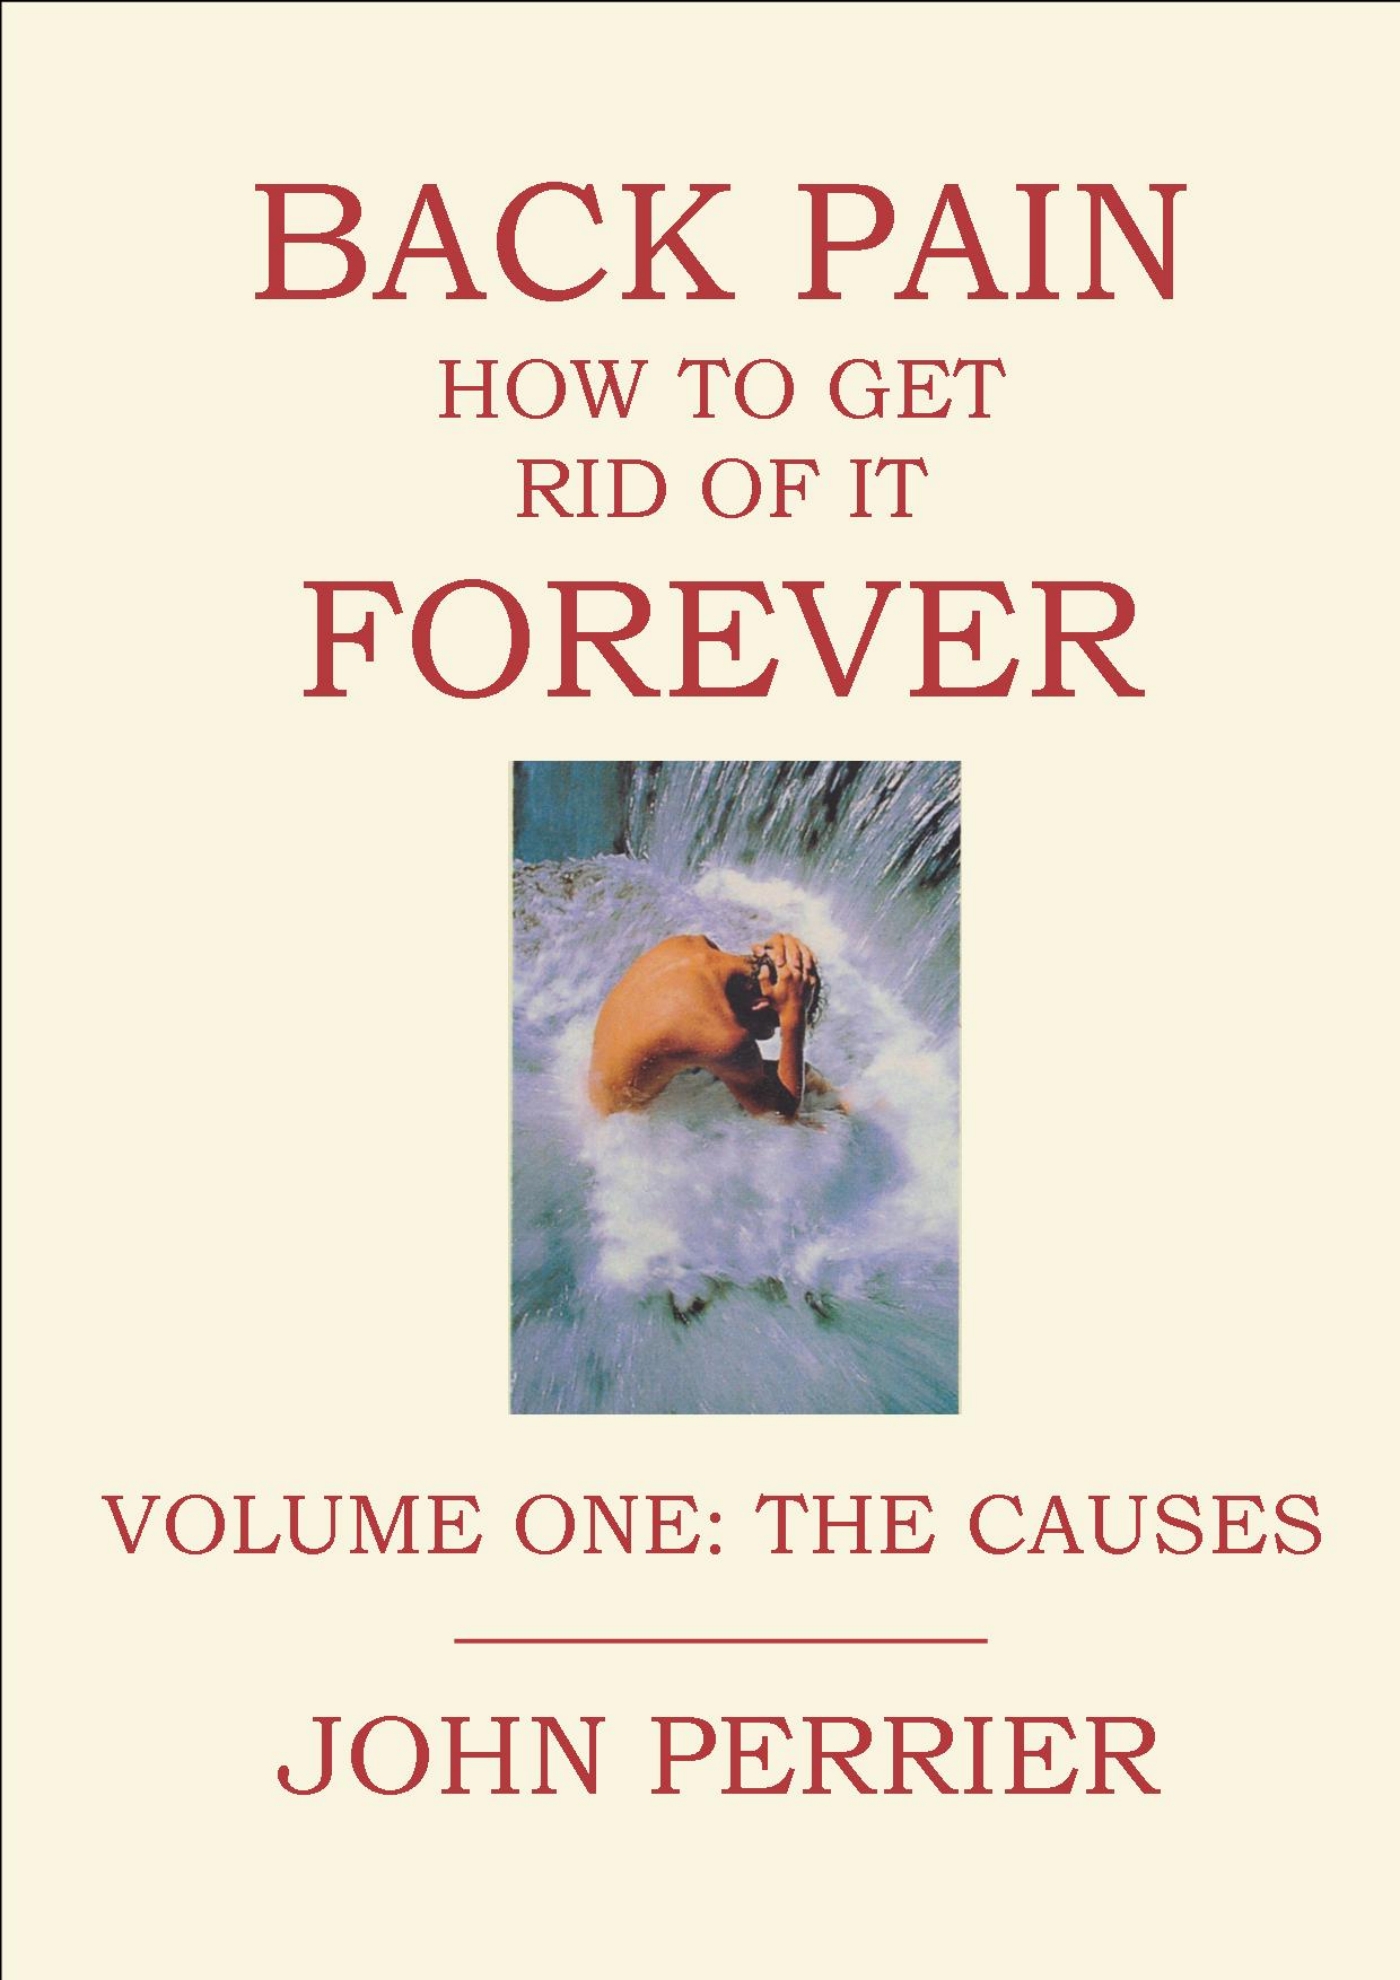 Back Pain: How to Get Rid of It Forever (Volume 1: The Causes)